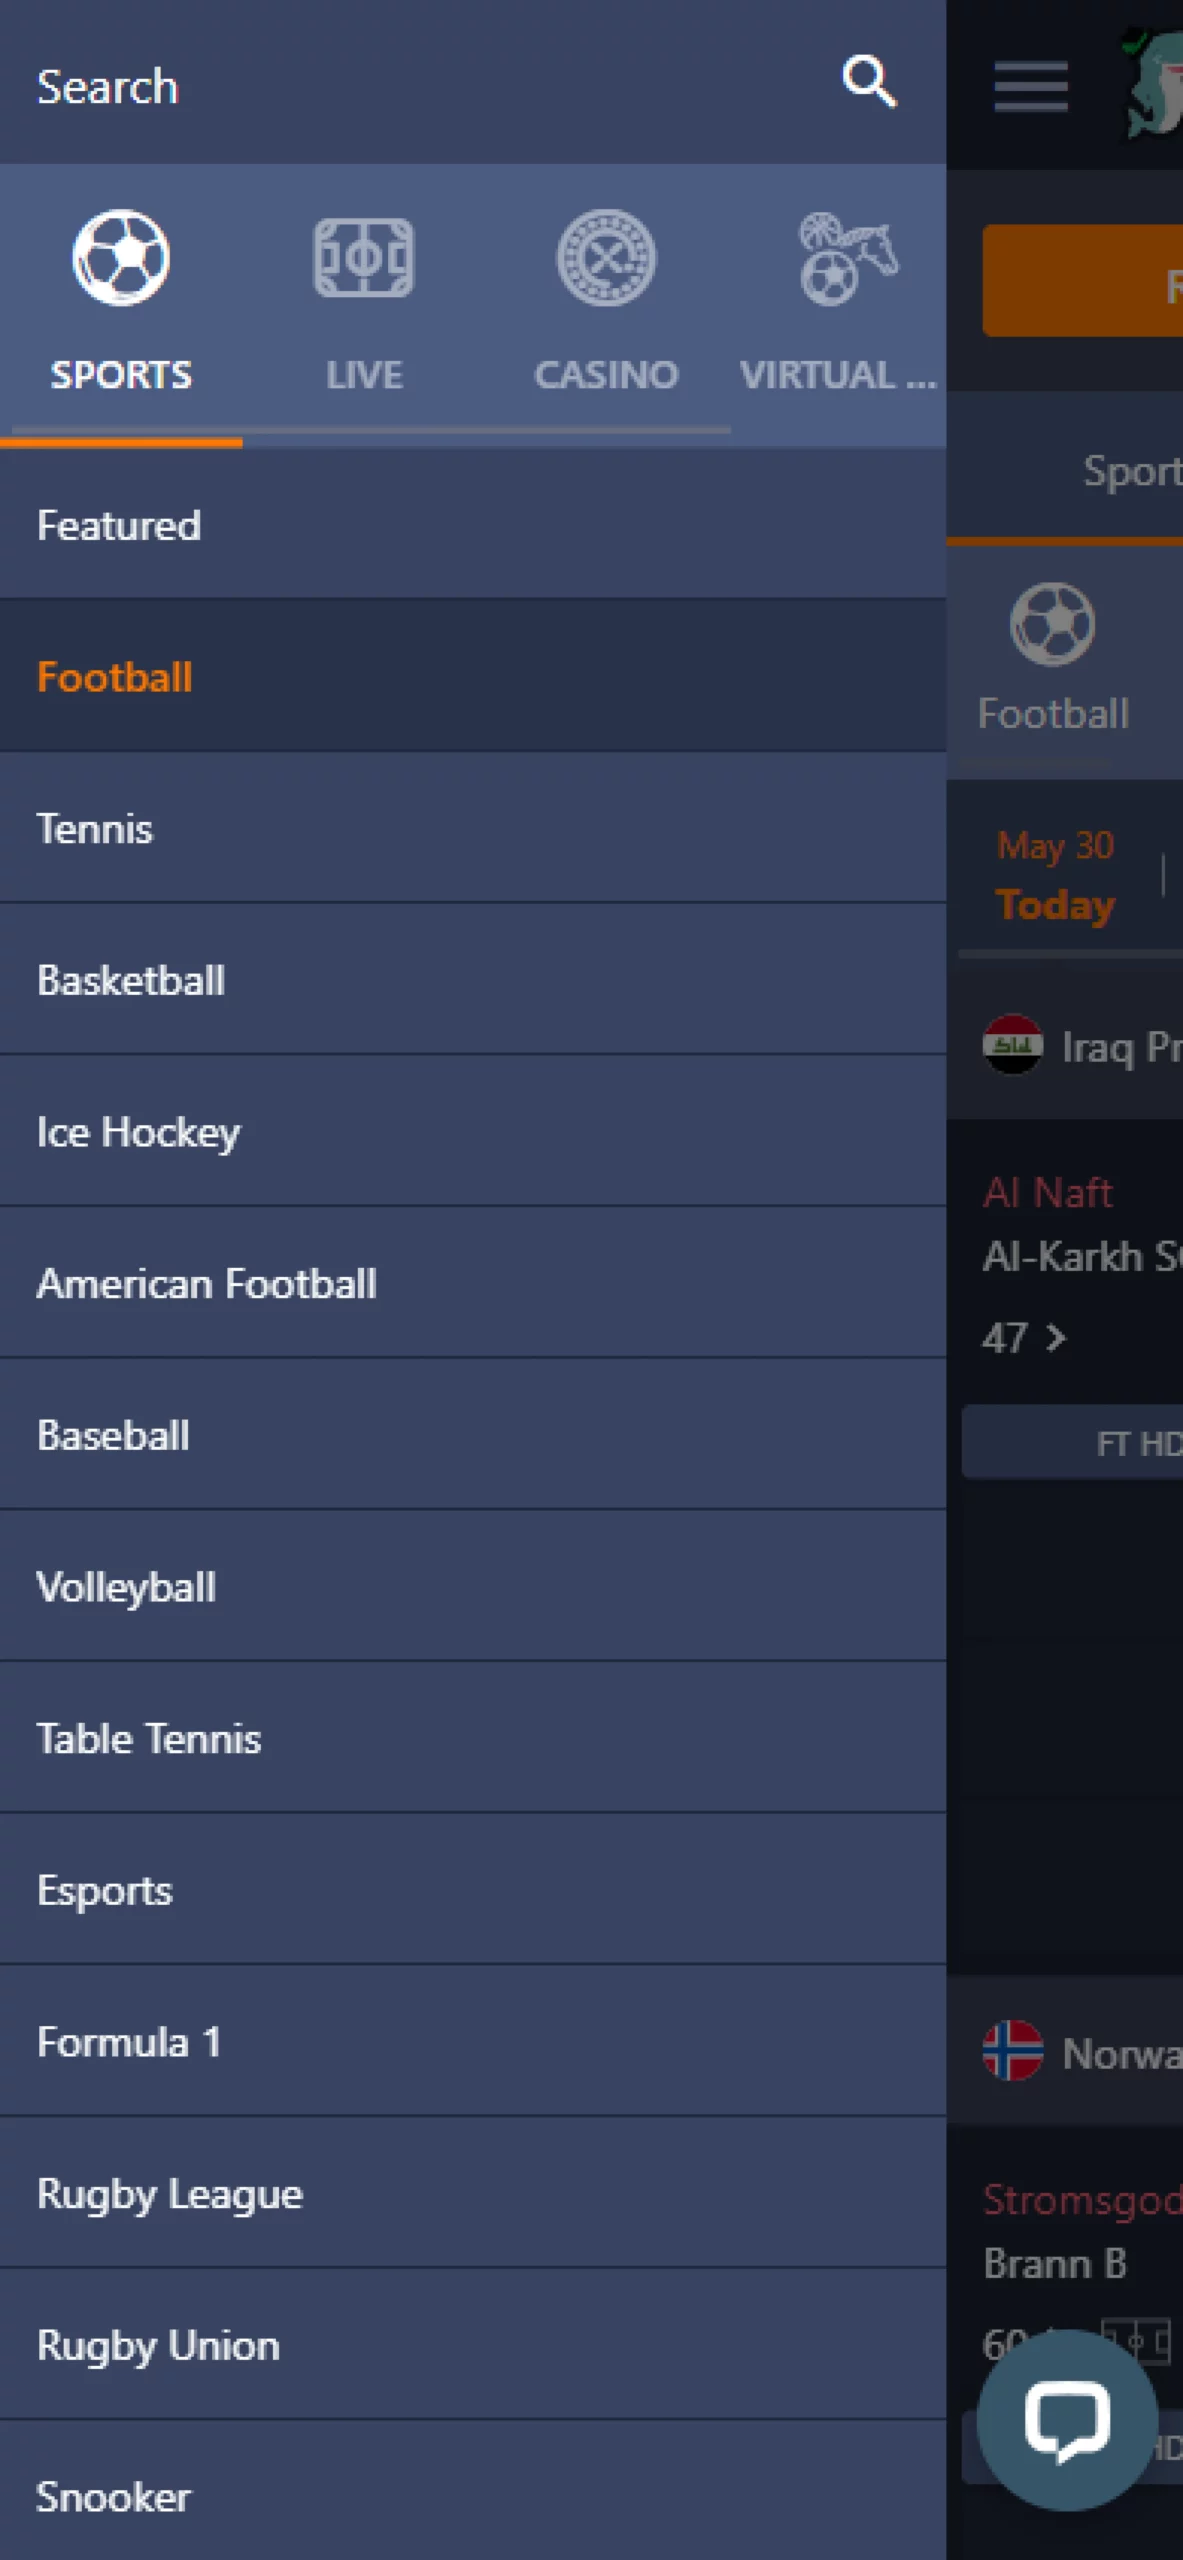 Try betting on new sports.